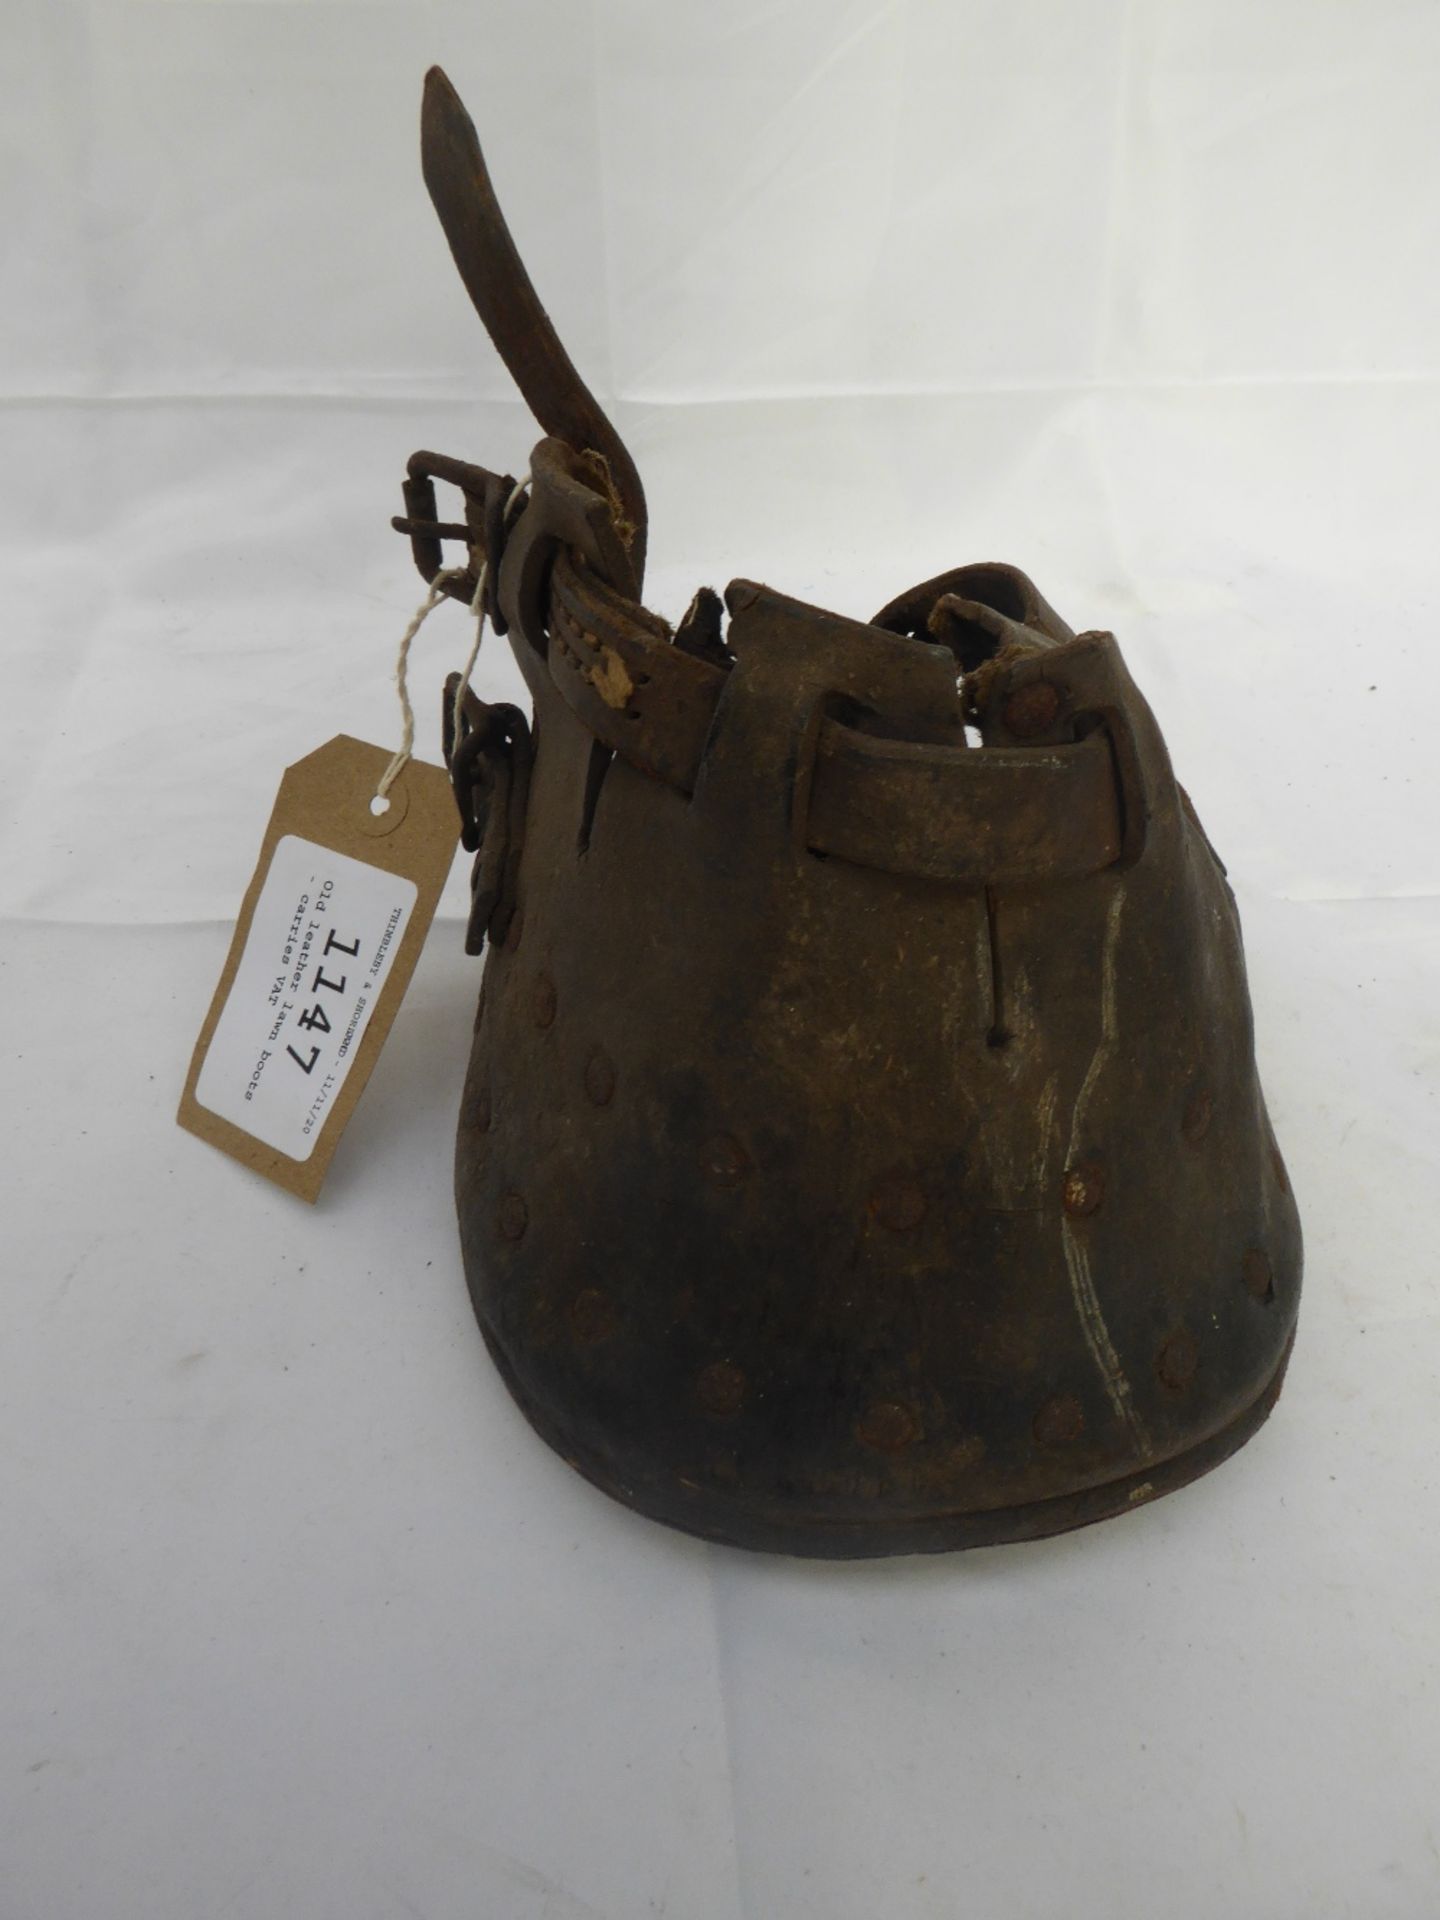 Old leather lawn boot - carries VAT